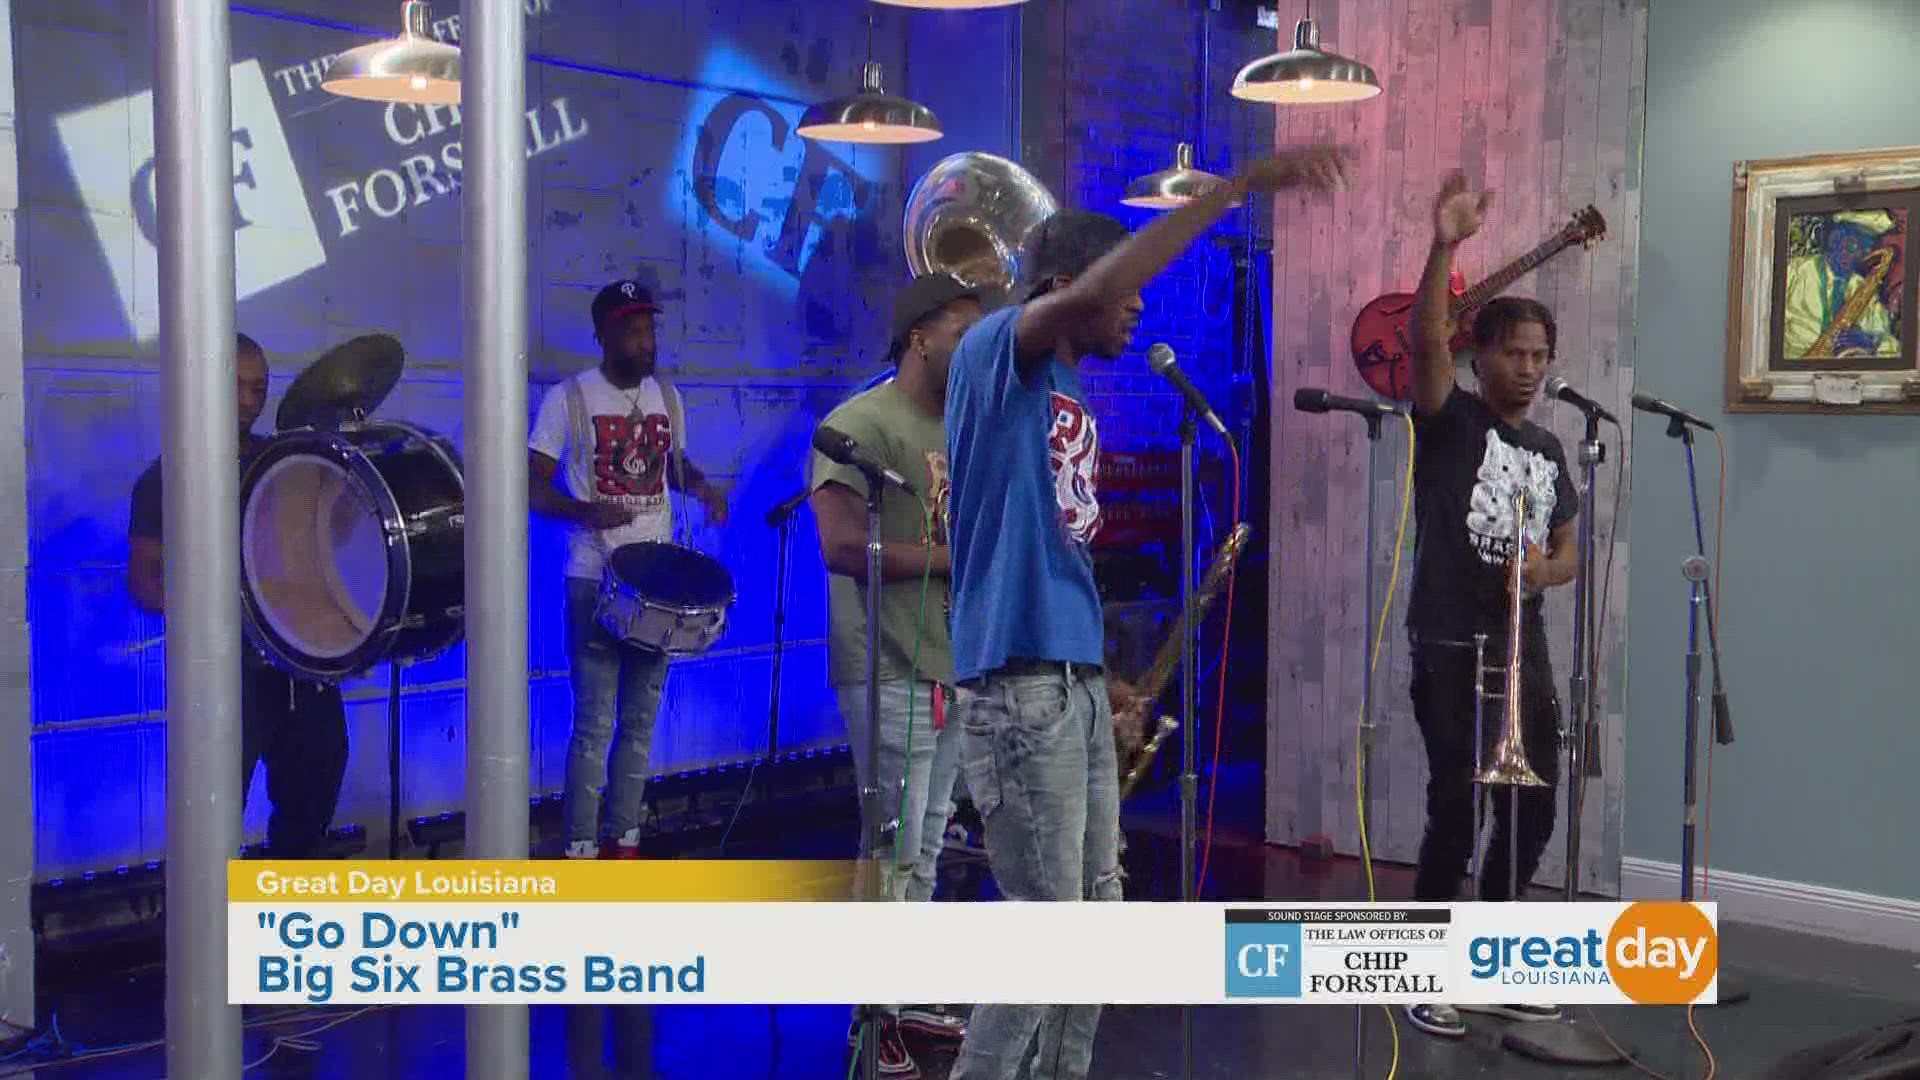 Big Six Brass Band is in the Chip Forstall Sound Stage to give us a preview of their performance at Red Bull Street Kings.